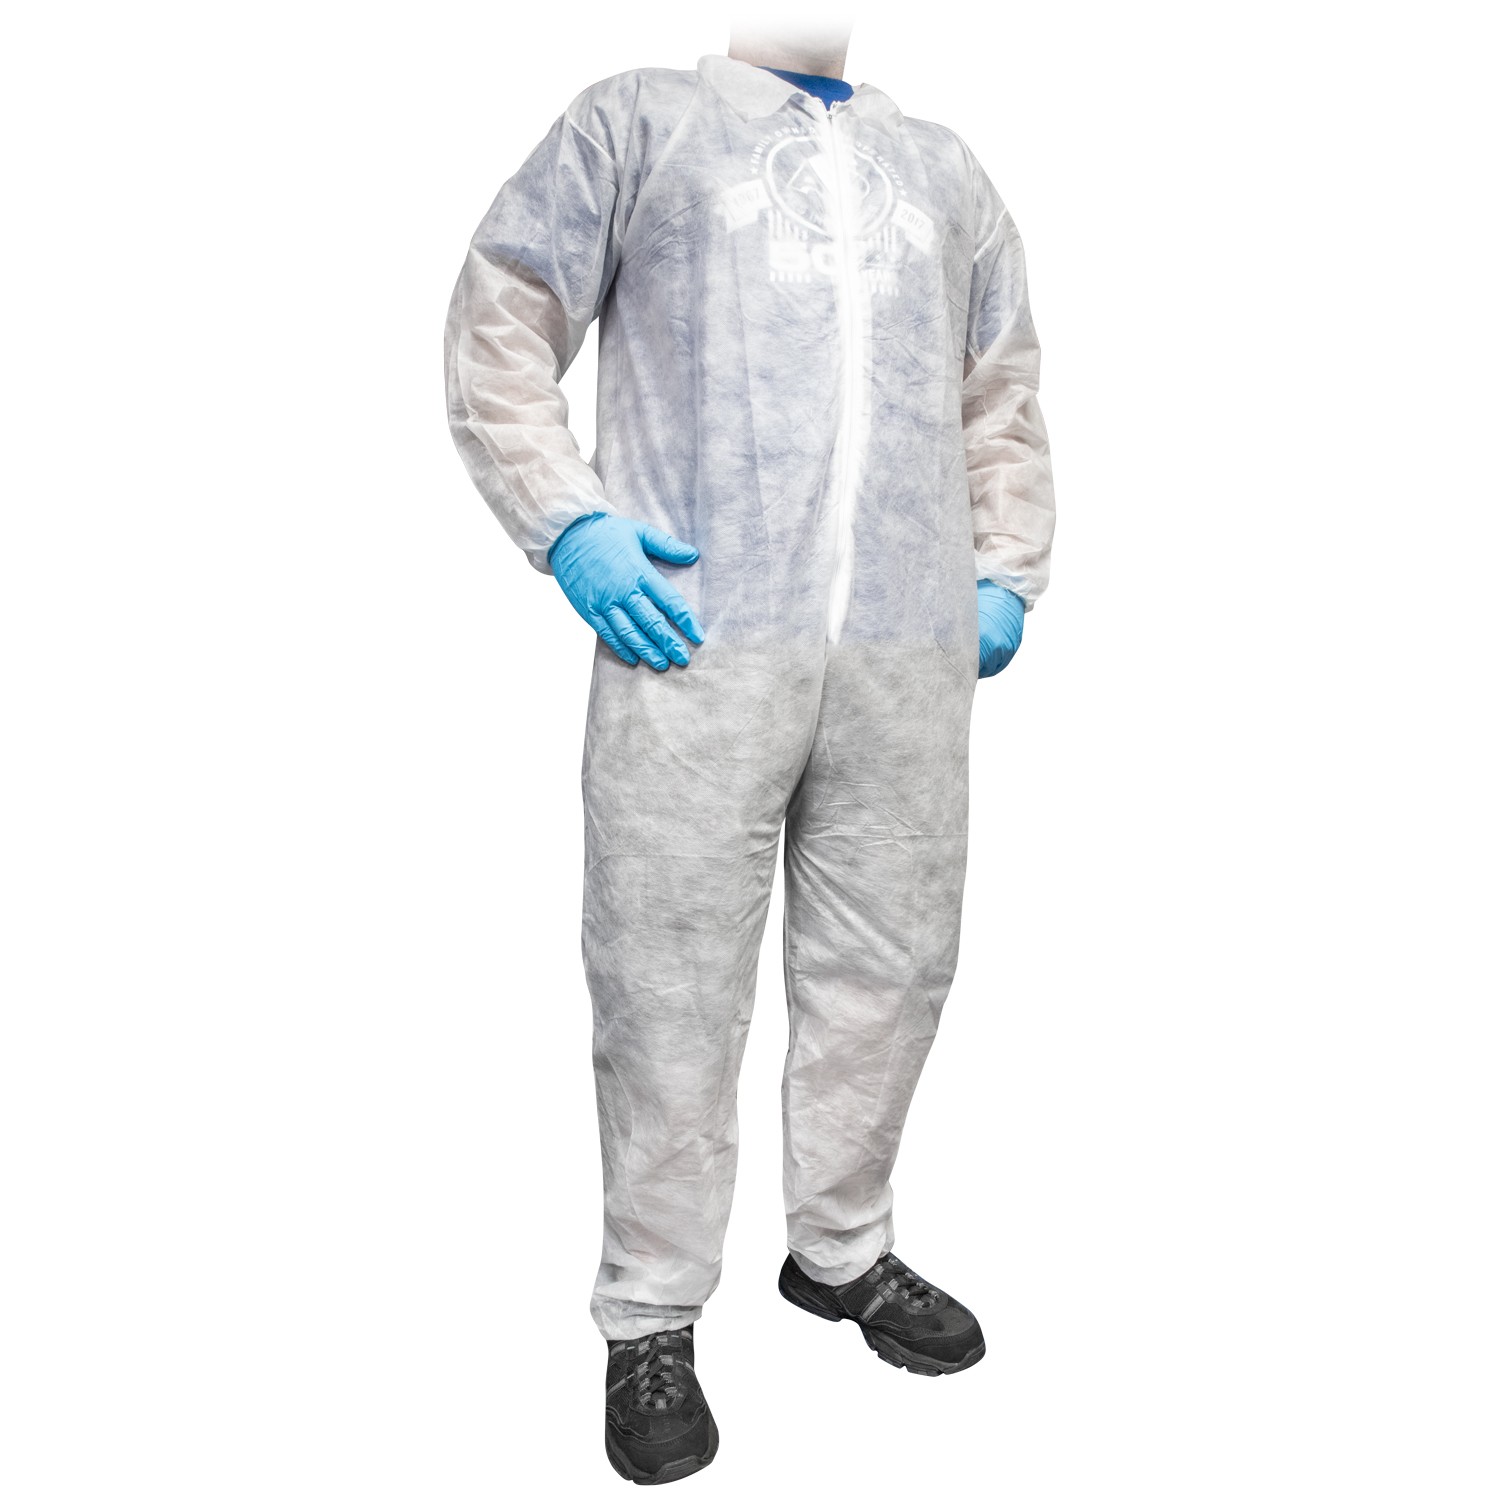 Coveralls - 2X Large